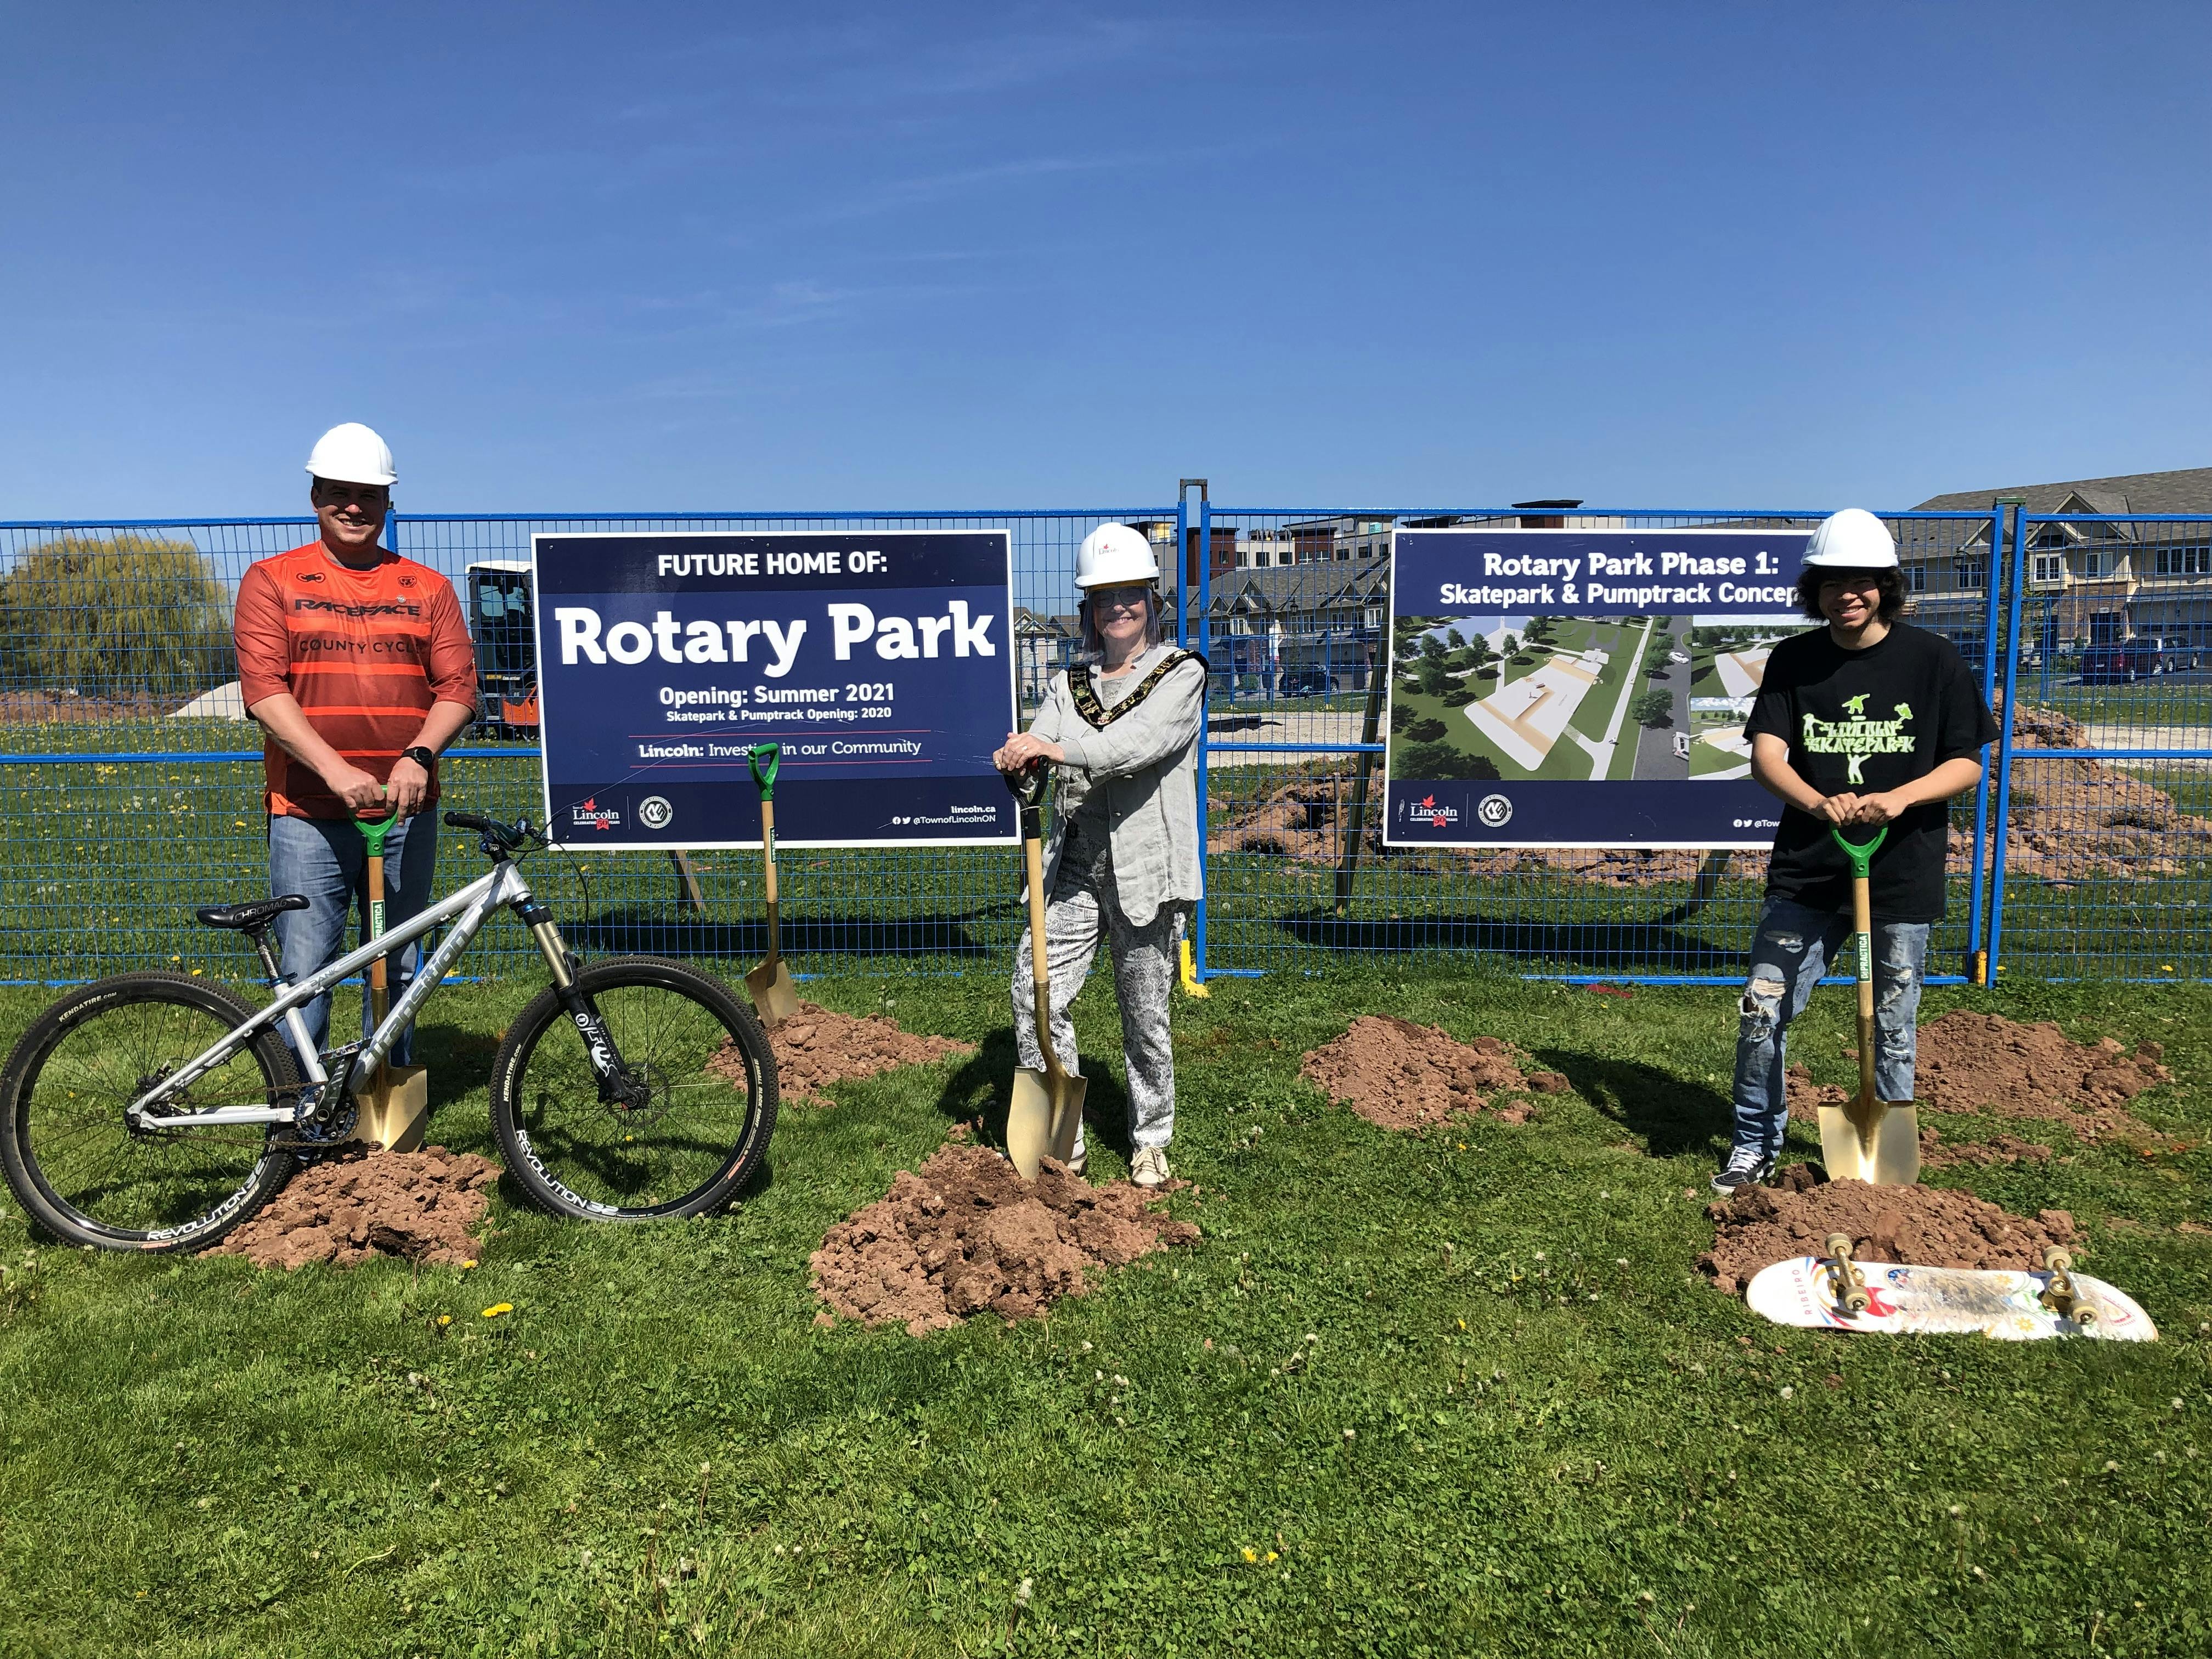 Mayor Easton and local youth champions break ground for Rotary Park